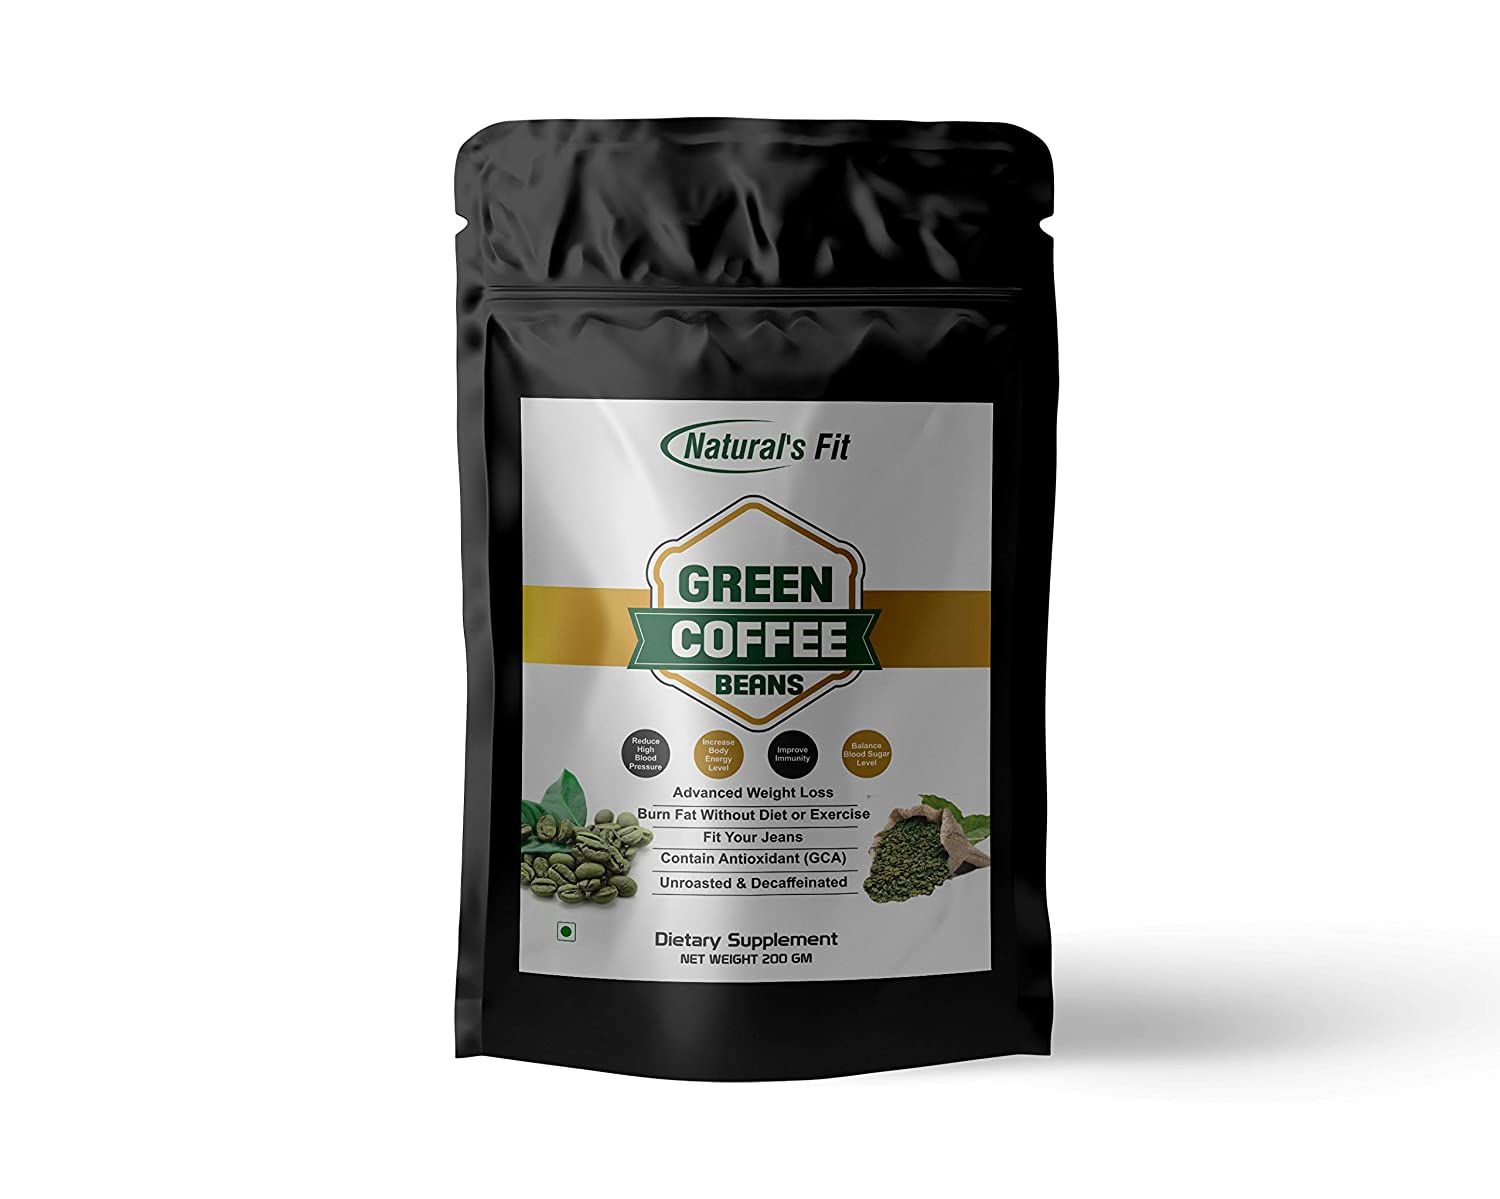 Natural's Fit Pure & Natural Arabian Green Coffee Beans Image